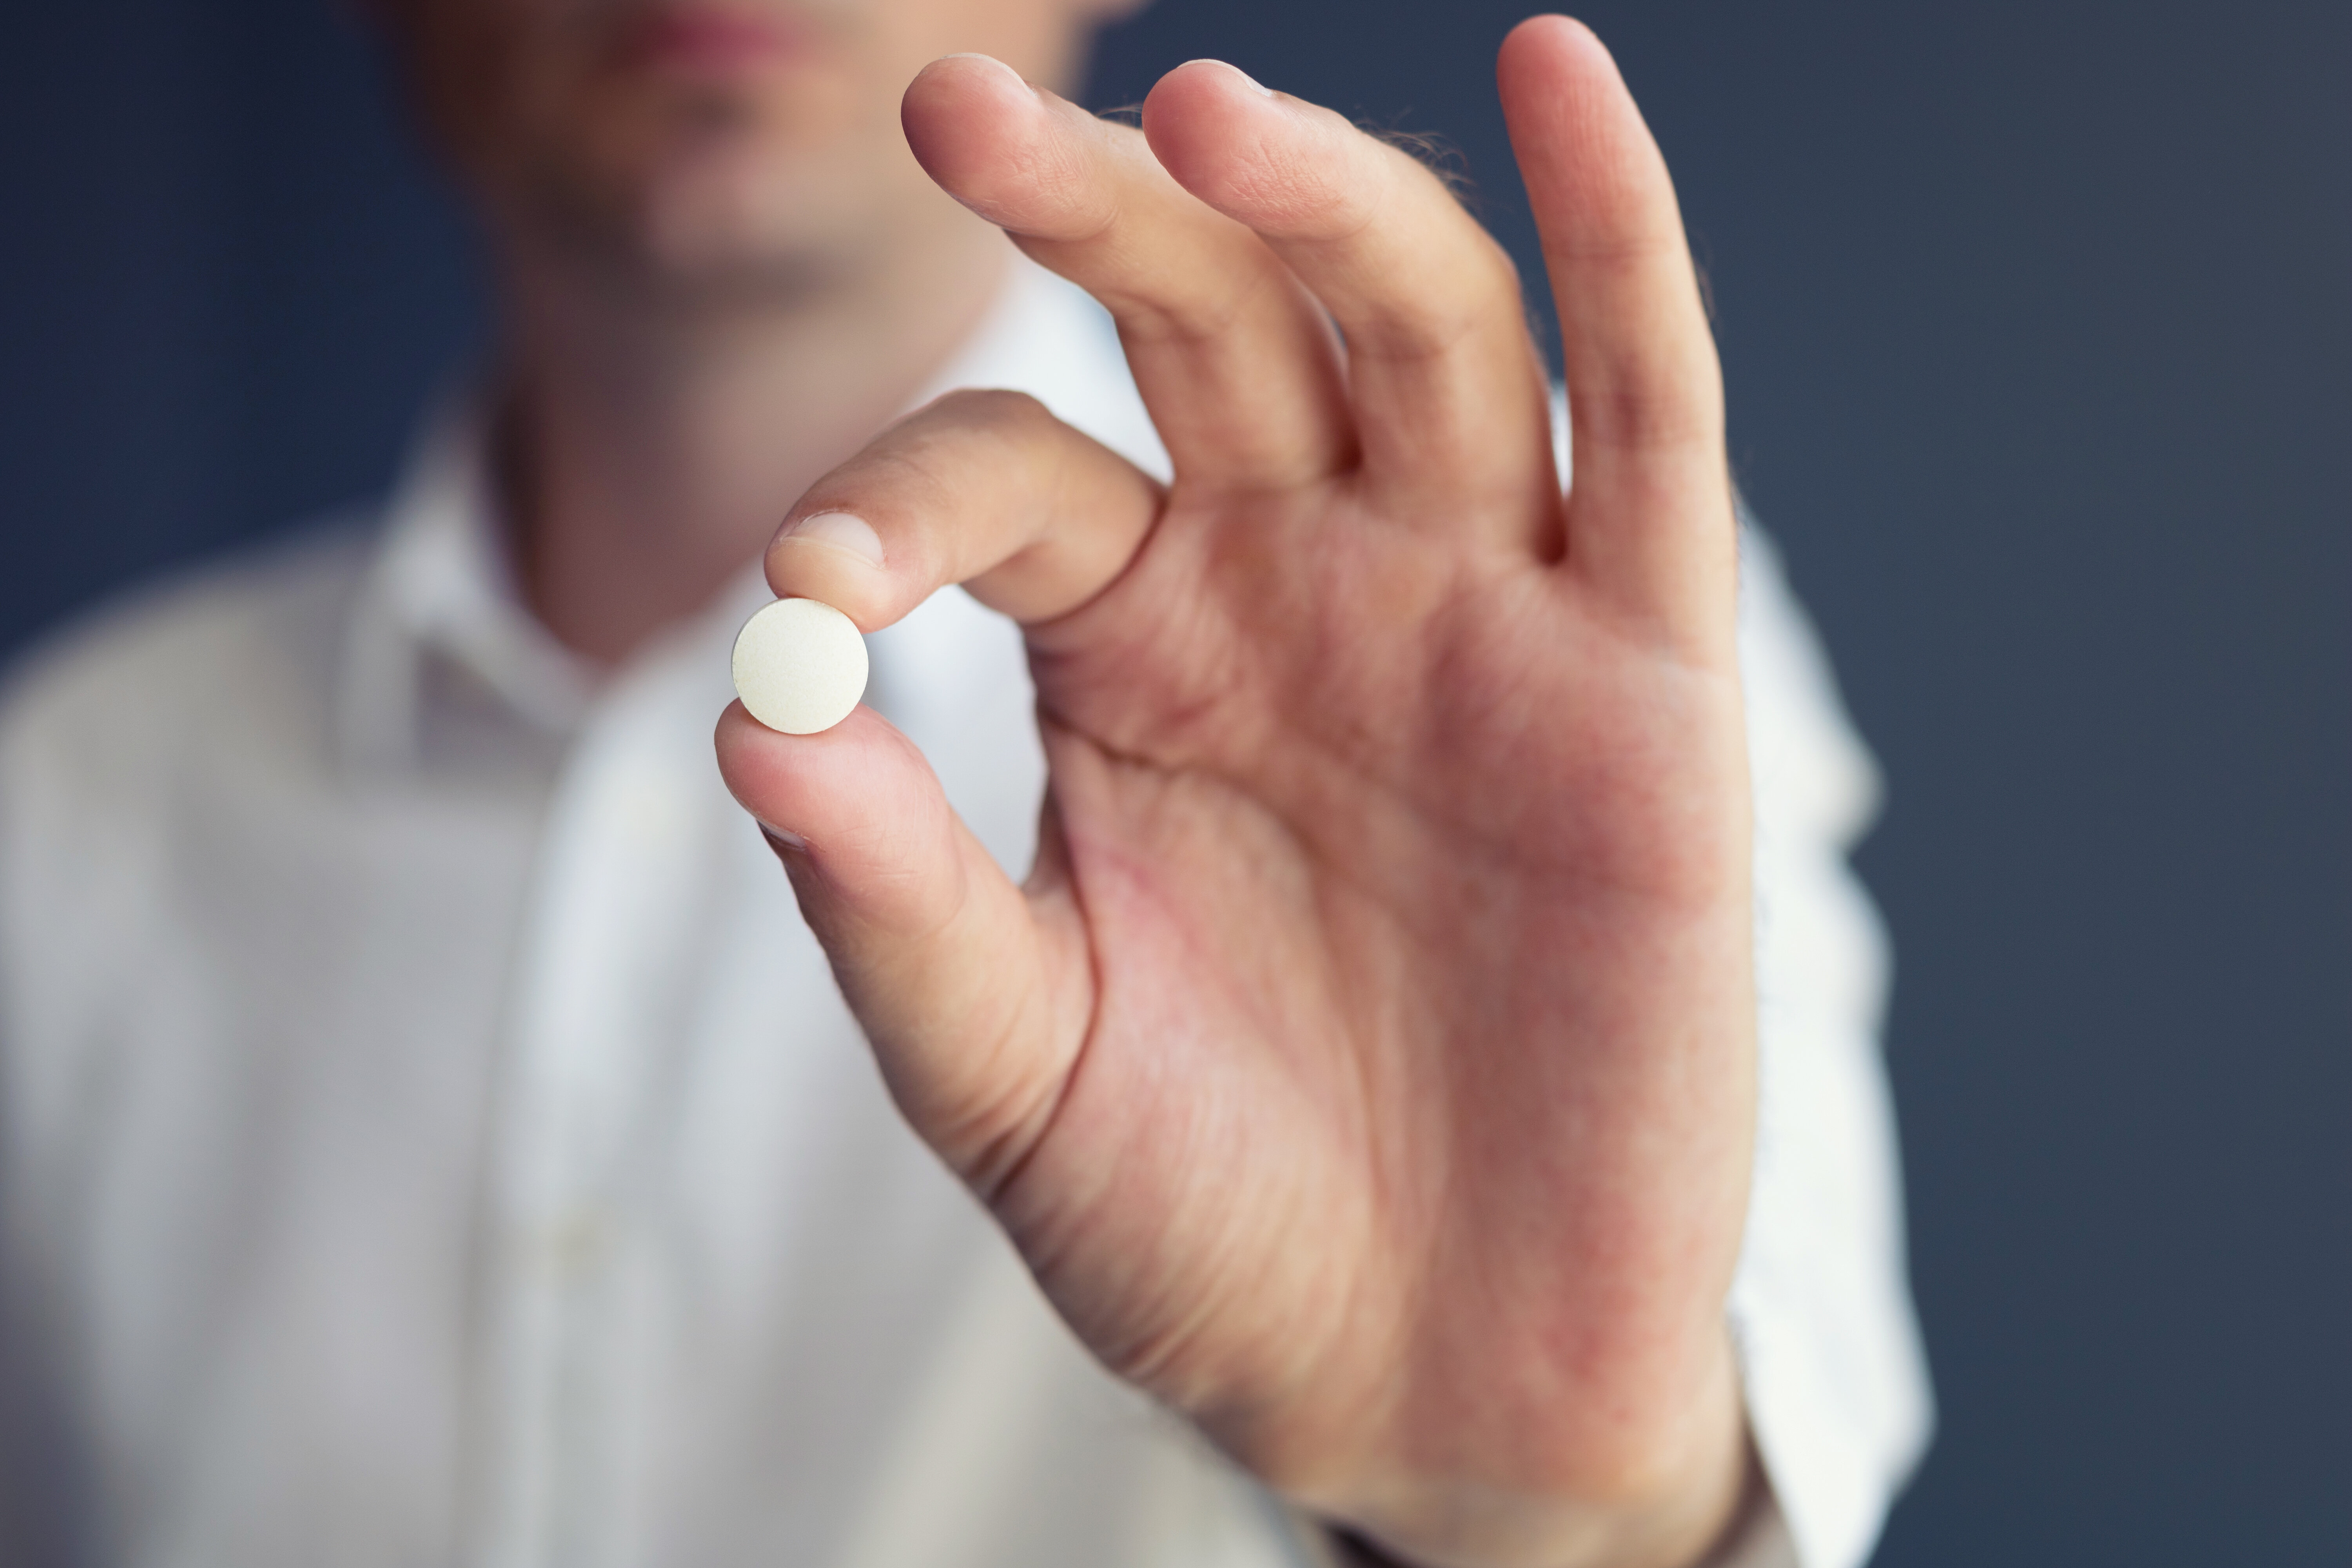 Person holding a pill between thumb and forefinger, focused on pill with blurred background